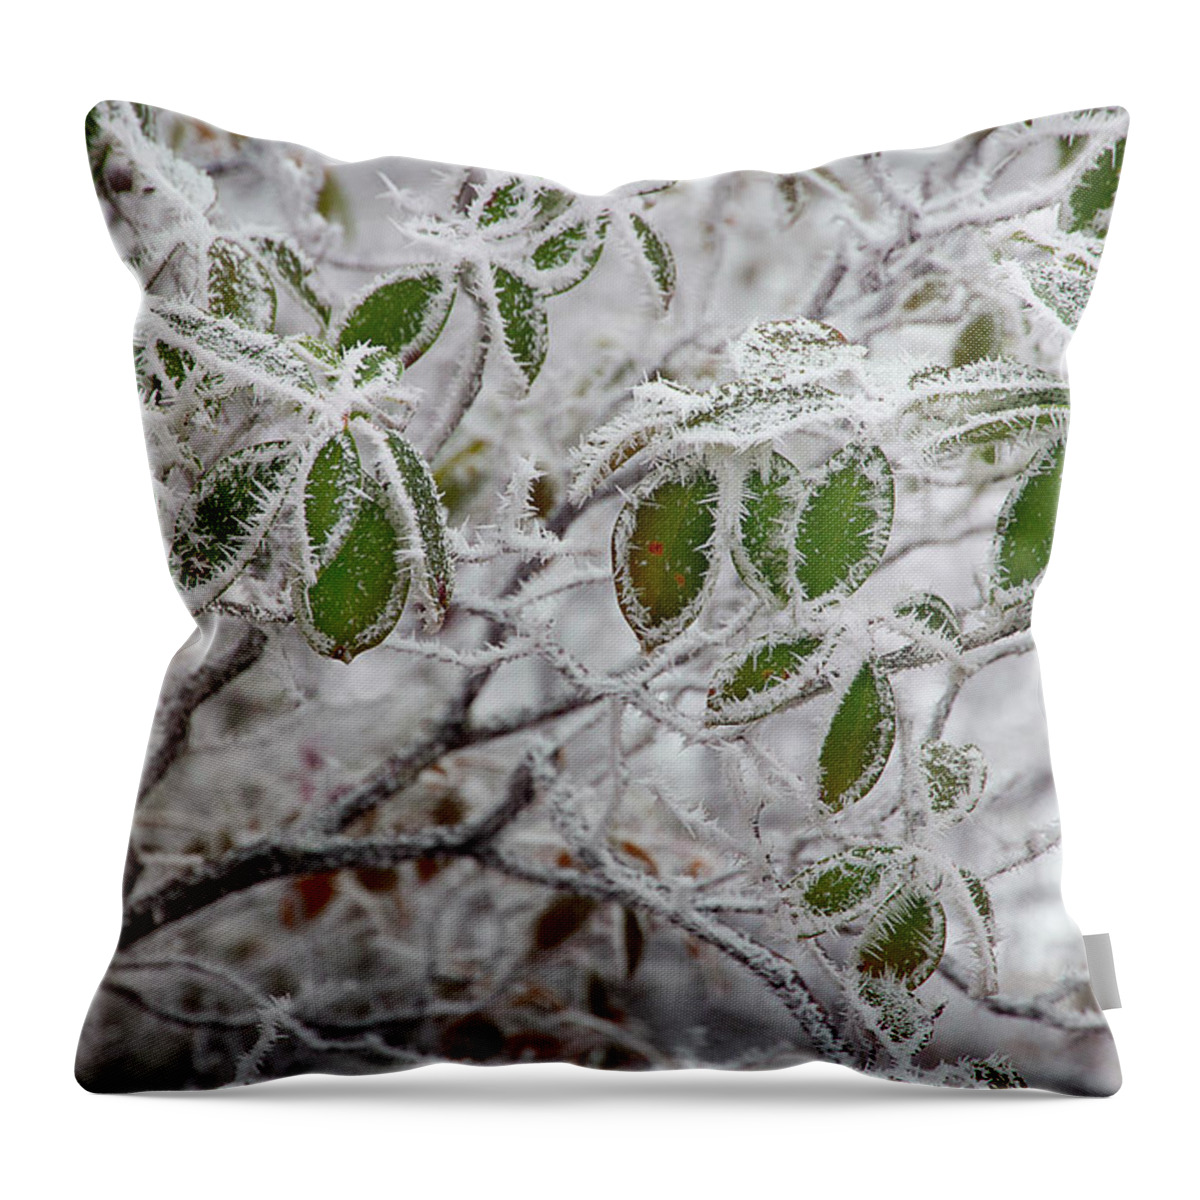 Frost Throw Pillow featuring the photograph It's Cold Outside by Mike Eingle